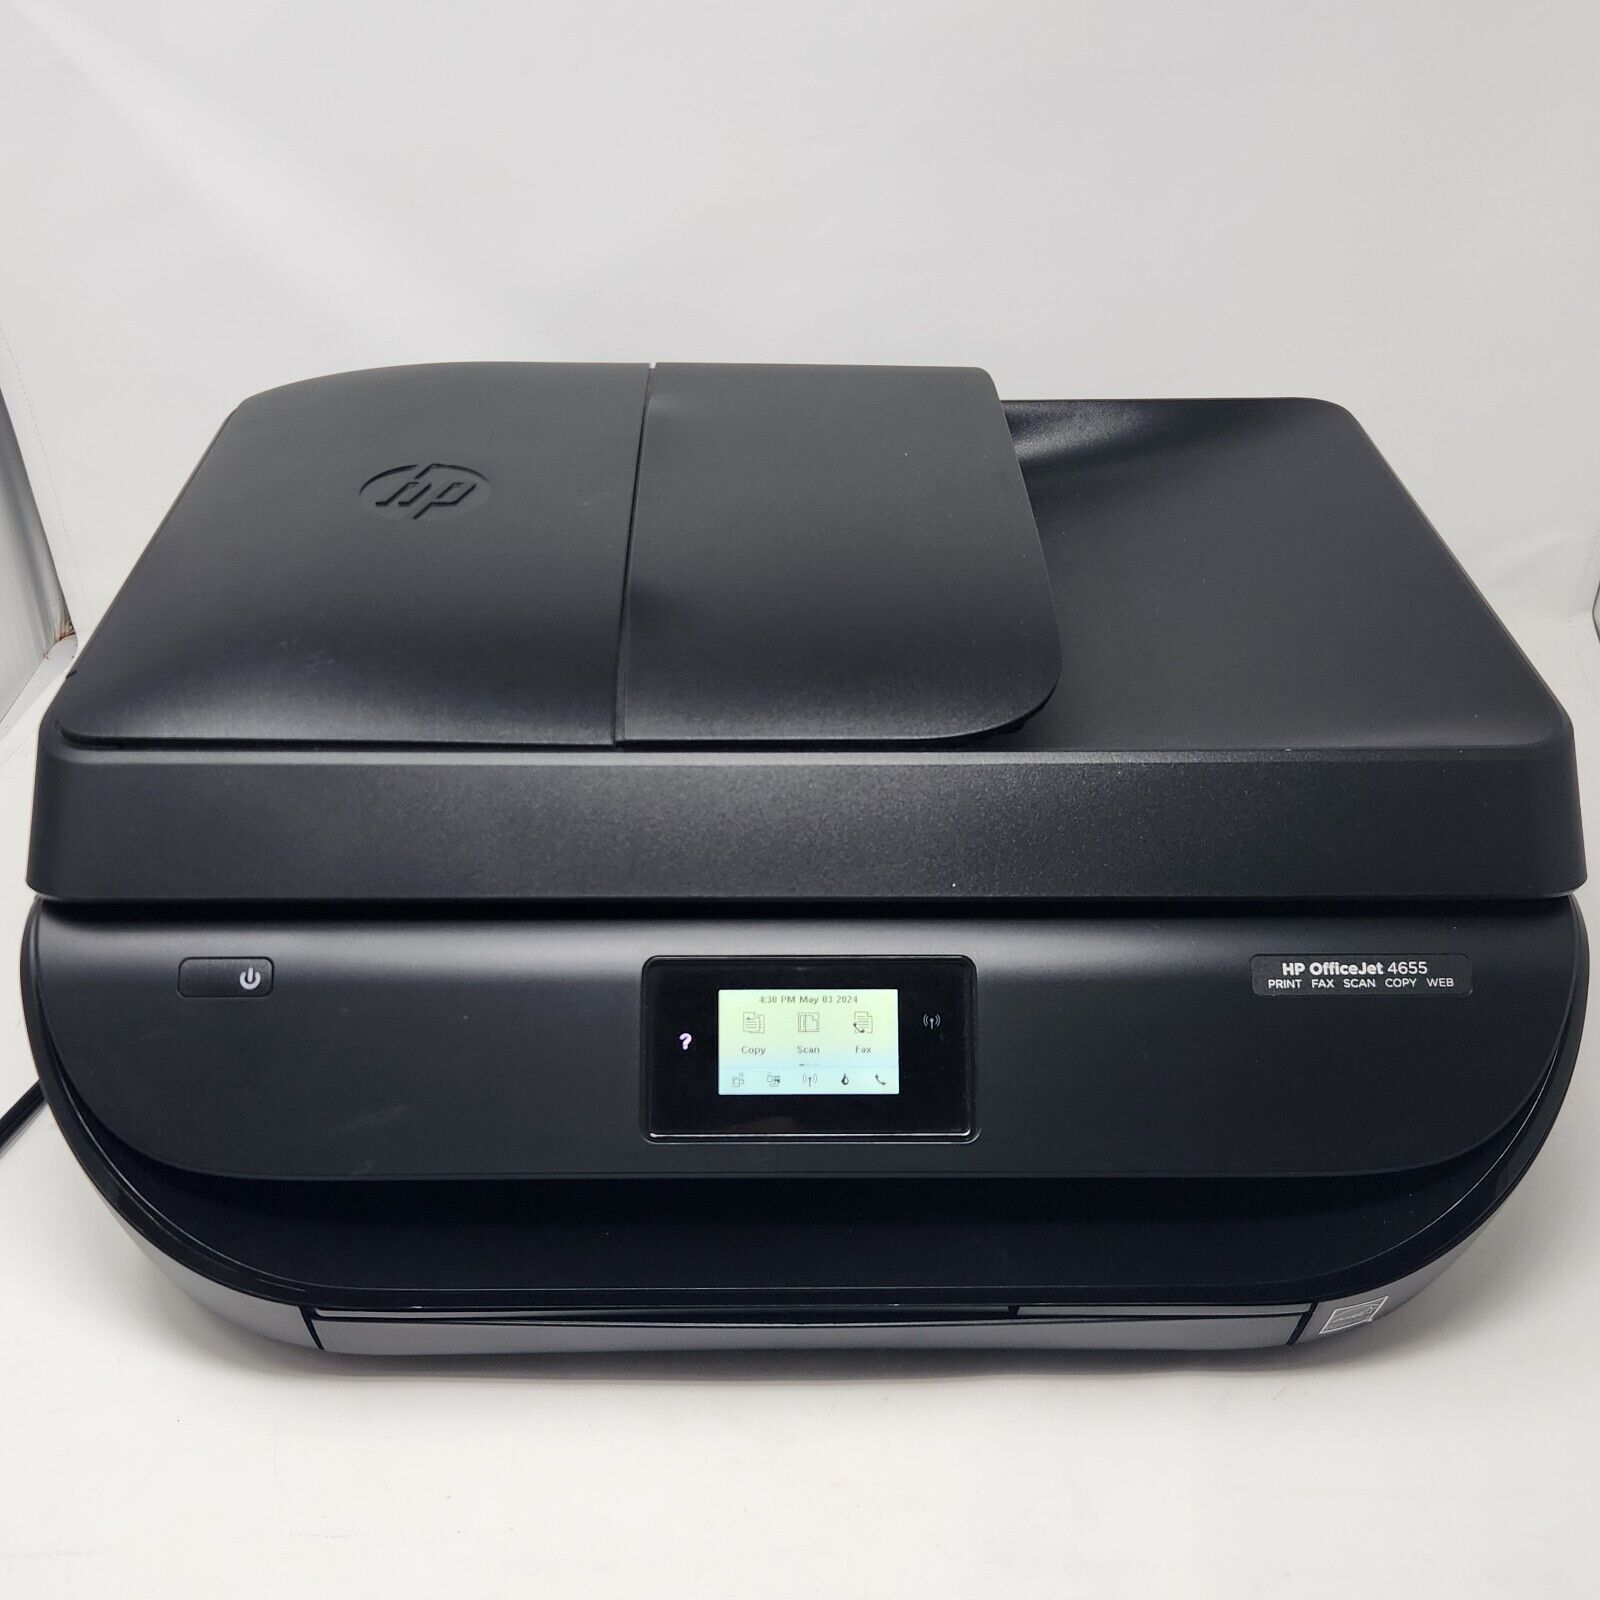 HP OfficeJet 4655 All-in-One Printer Tested Works Print Scan Fax Copy